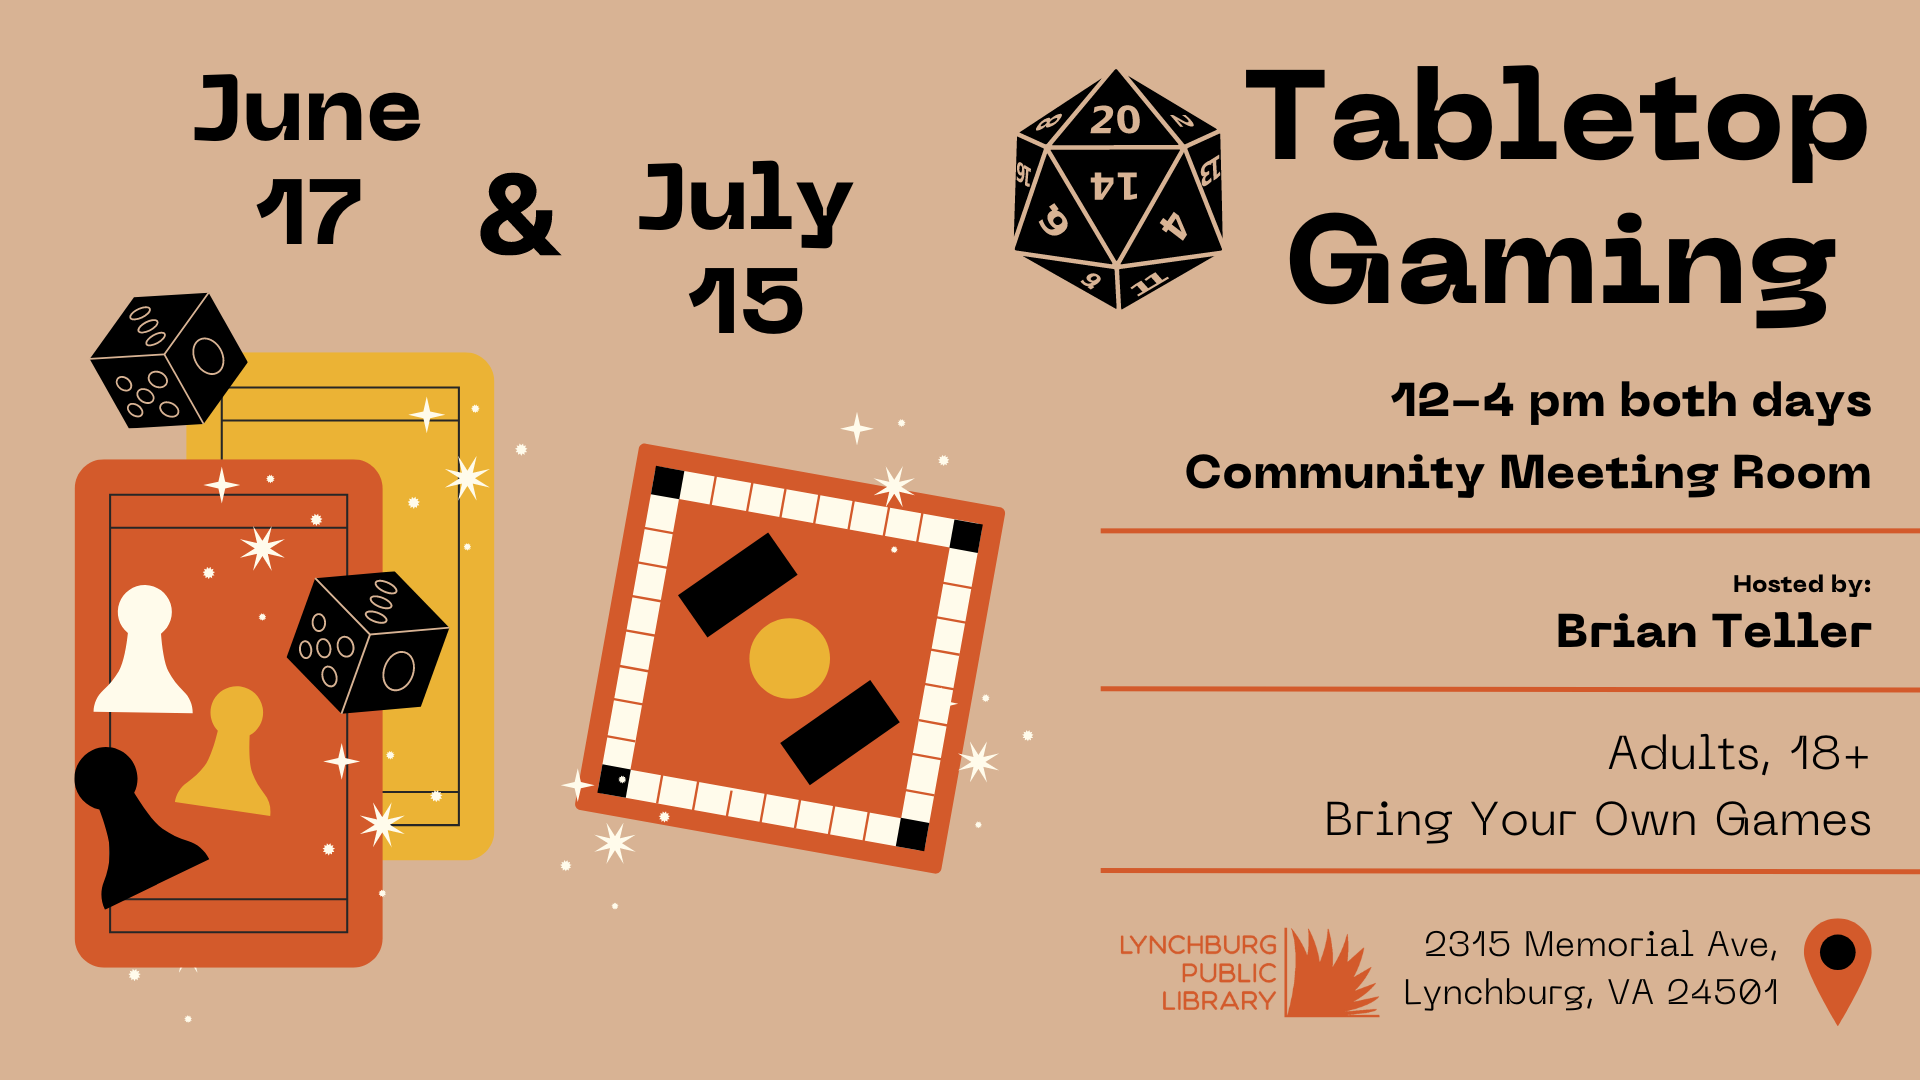 June 17th and july 15th; tabletop gaming; 12-4 pm both days, hosted by brian teller; adults 18+; bring your own games; 2315 memorial ave